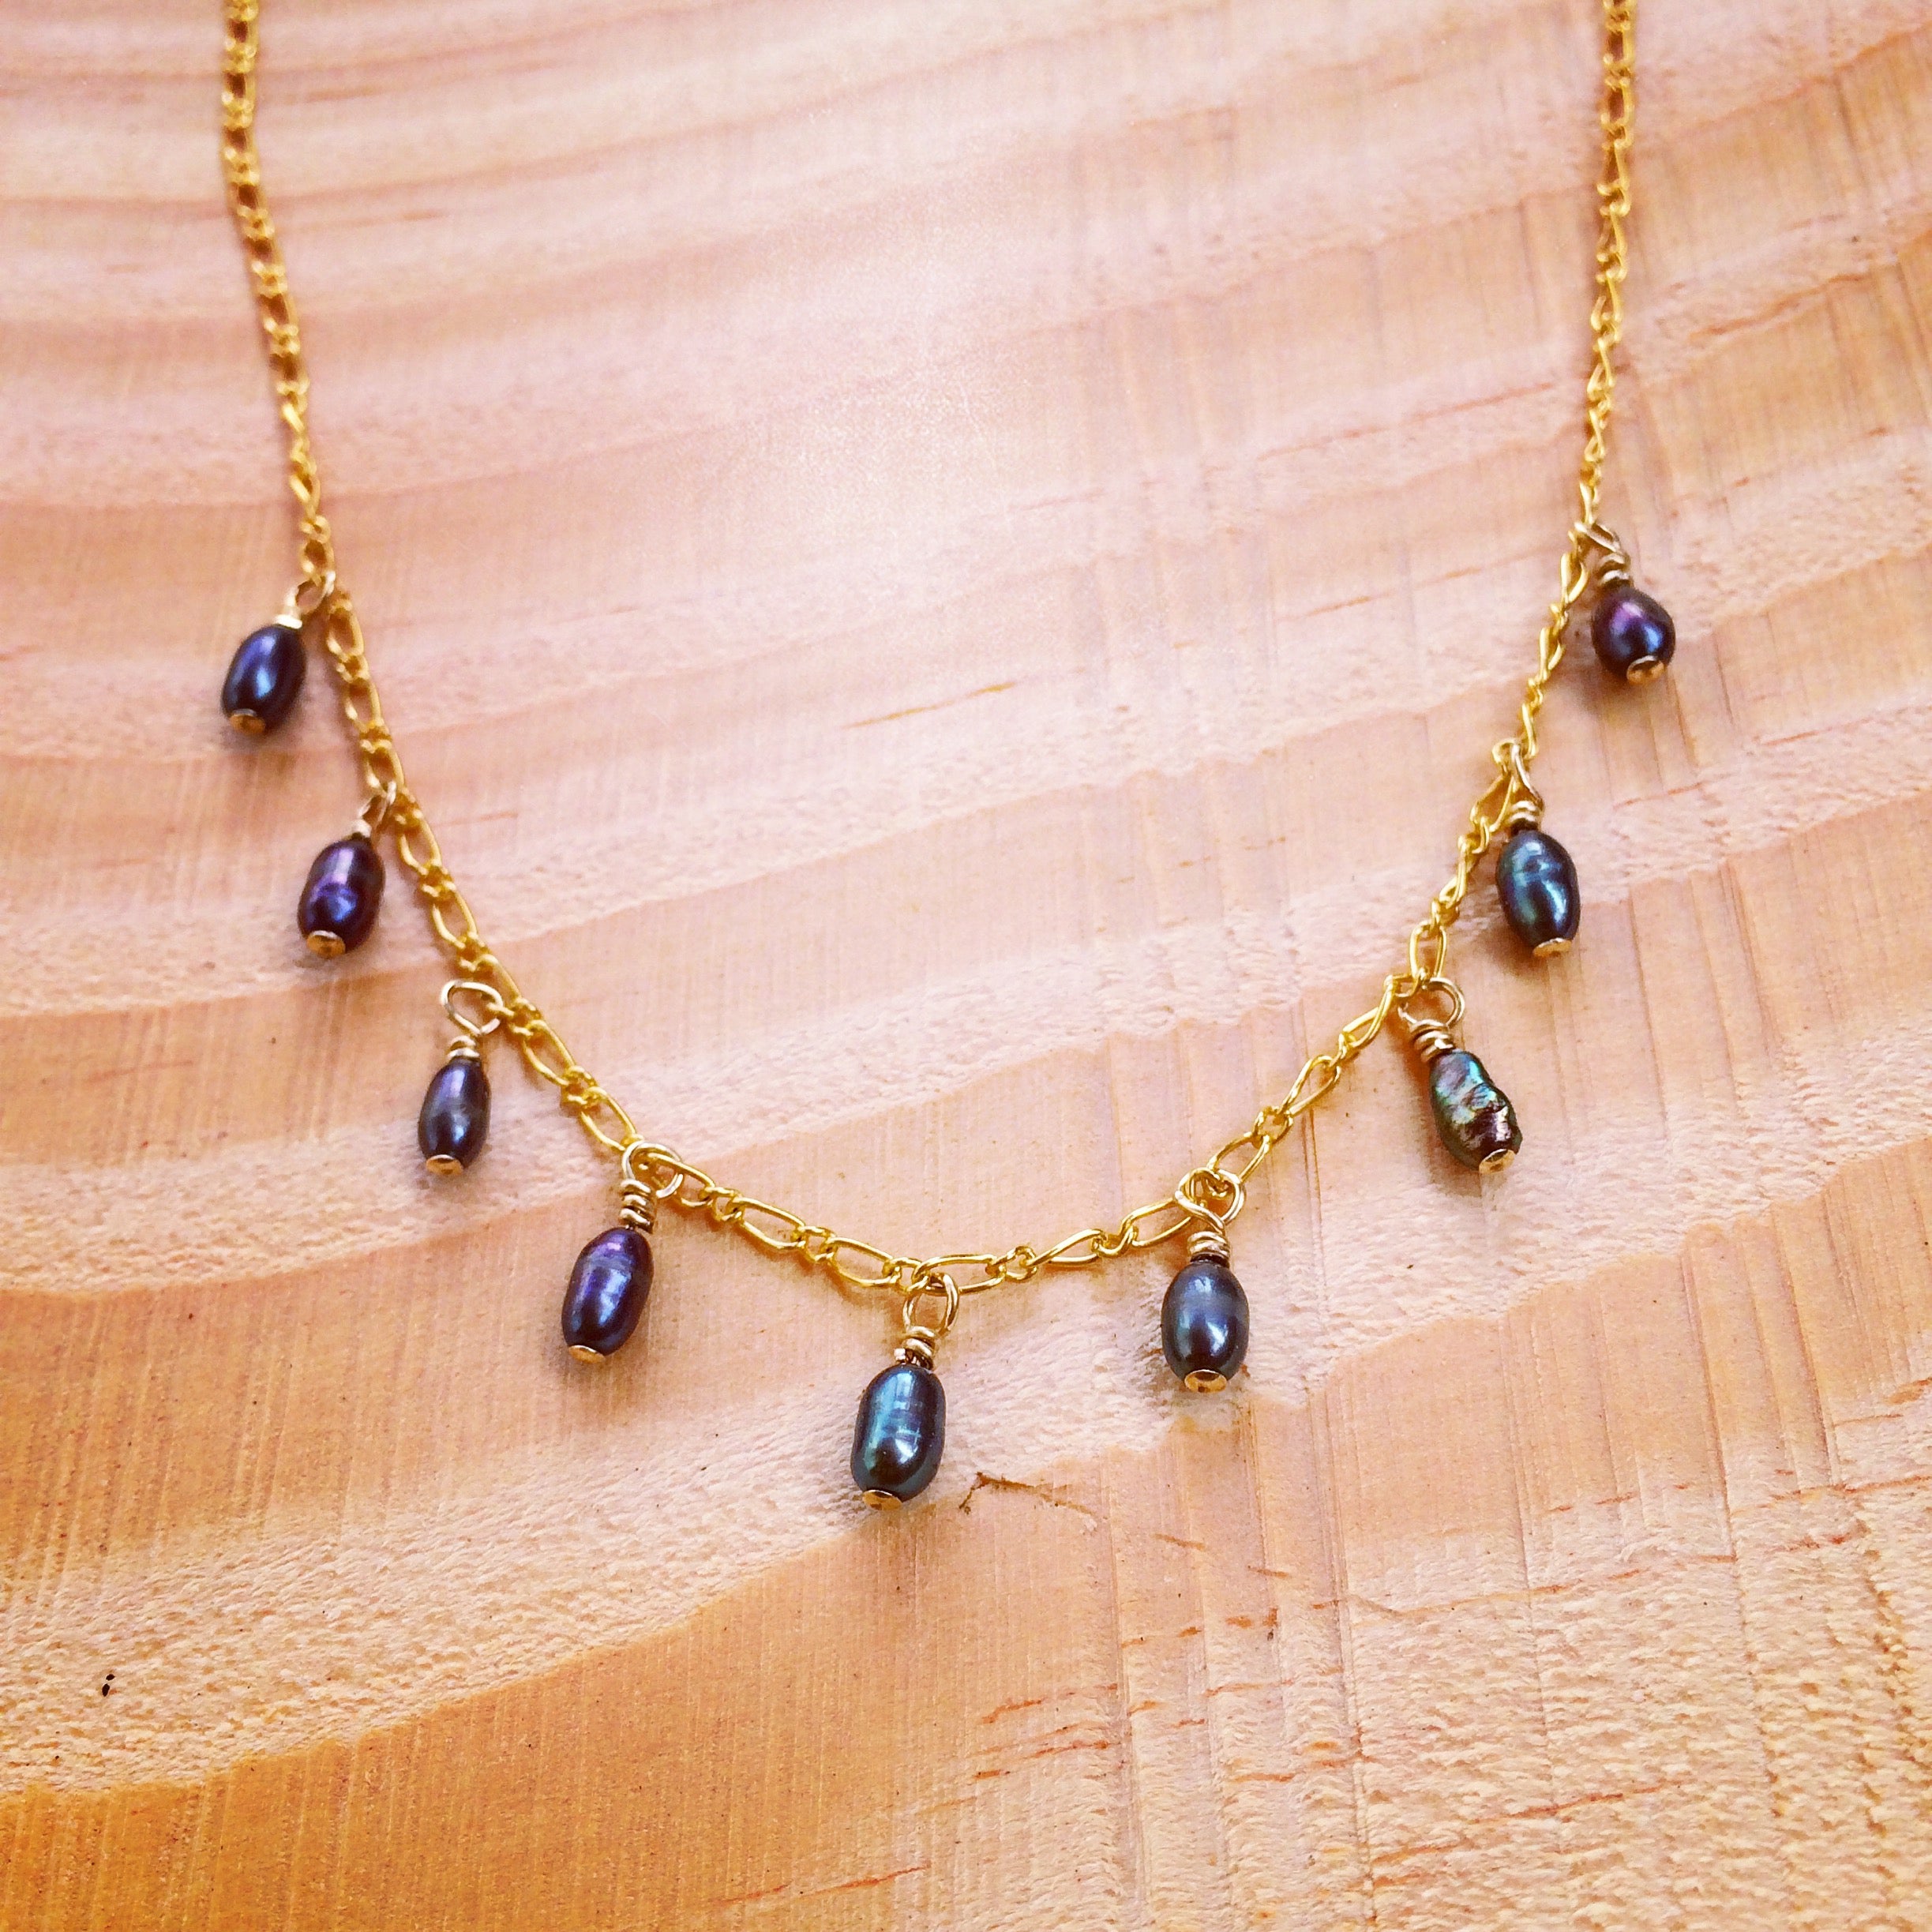 necklace with 9 tiny black pearls spaced 1'4 inch apart dangling on a gold chain on wooden background